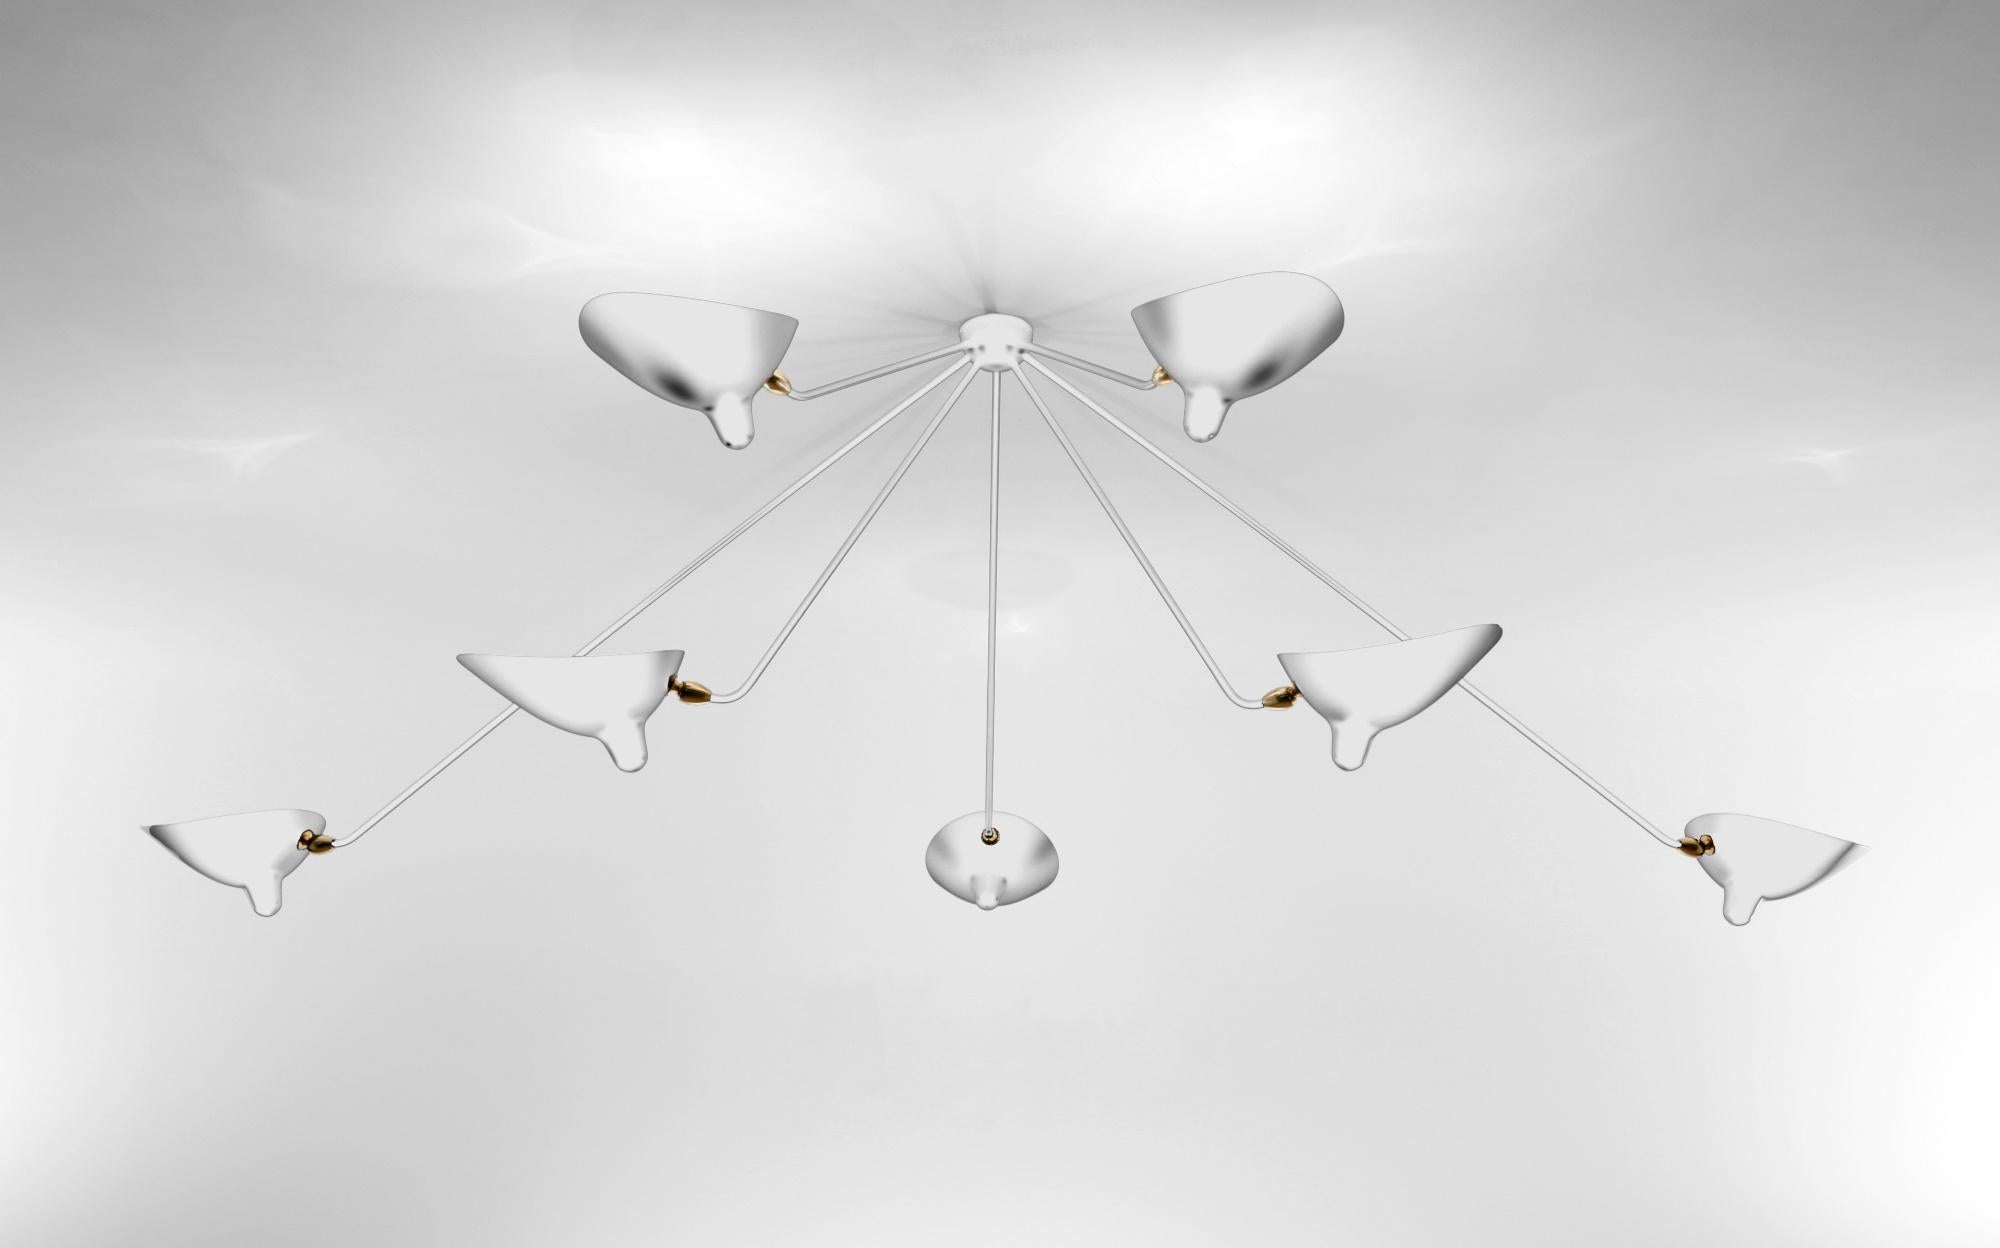 This lamp with rotating heads on seven fixed arms is a statement as much as it is a ceiling lamp - one that will command the conversation.

Available in white or black. Brass swivels connect the shades.

Color option
Available in Black or